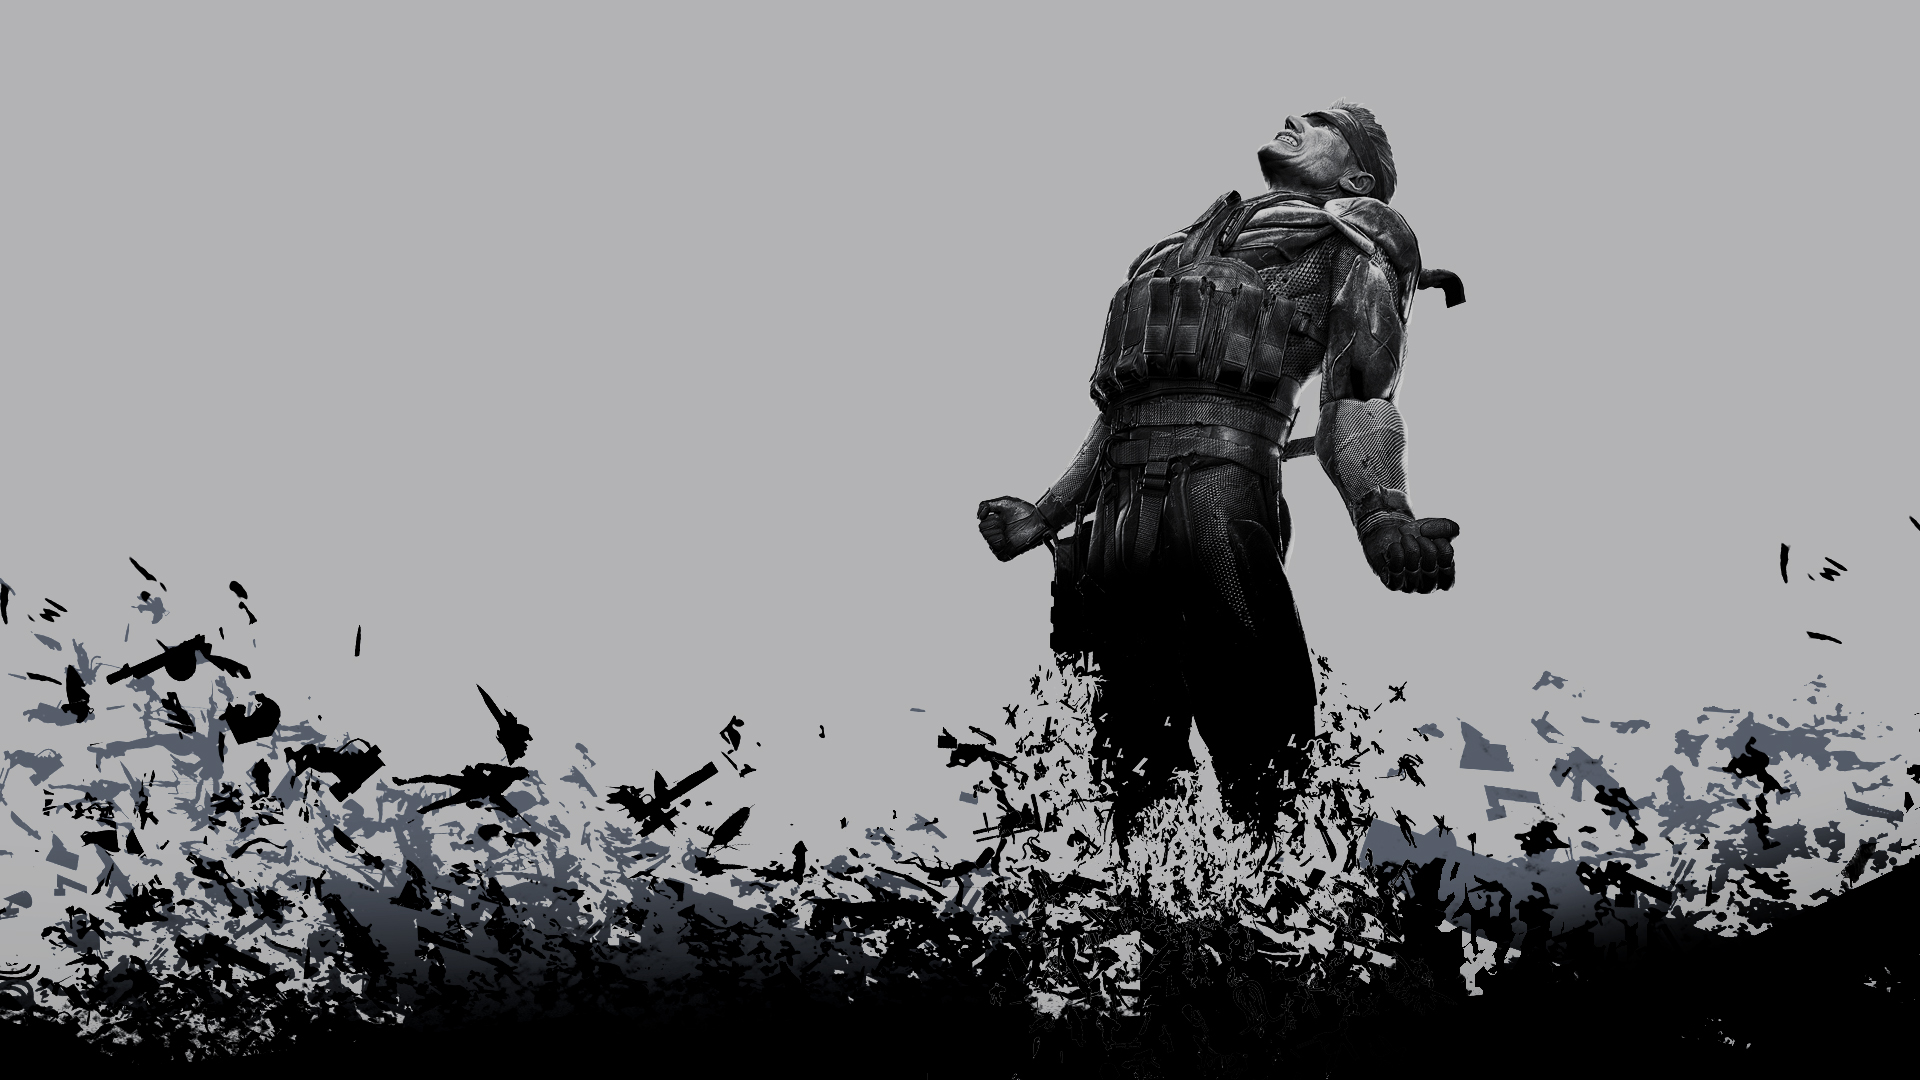 Mgs Solid Snake Wallpaper